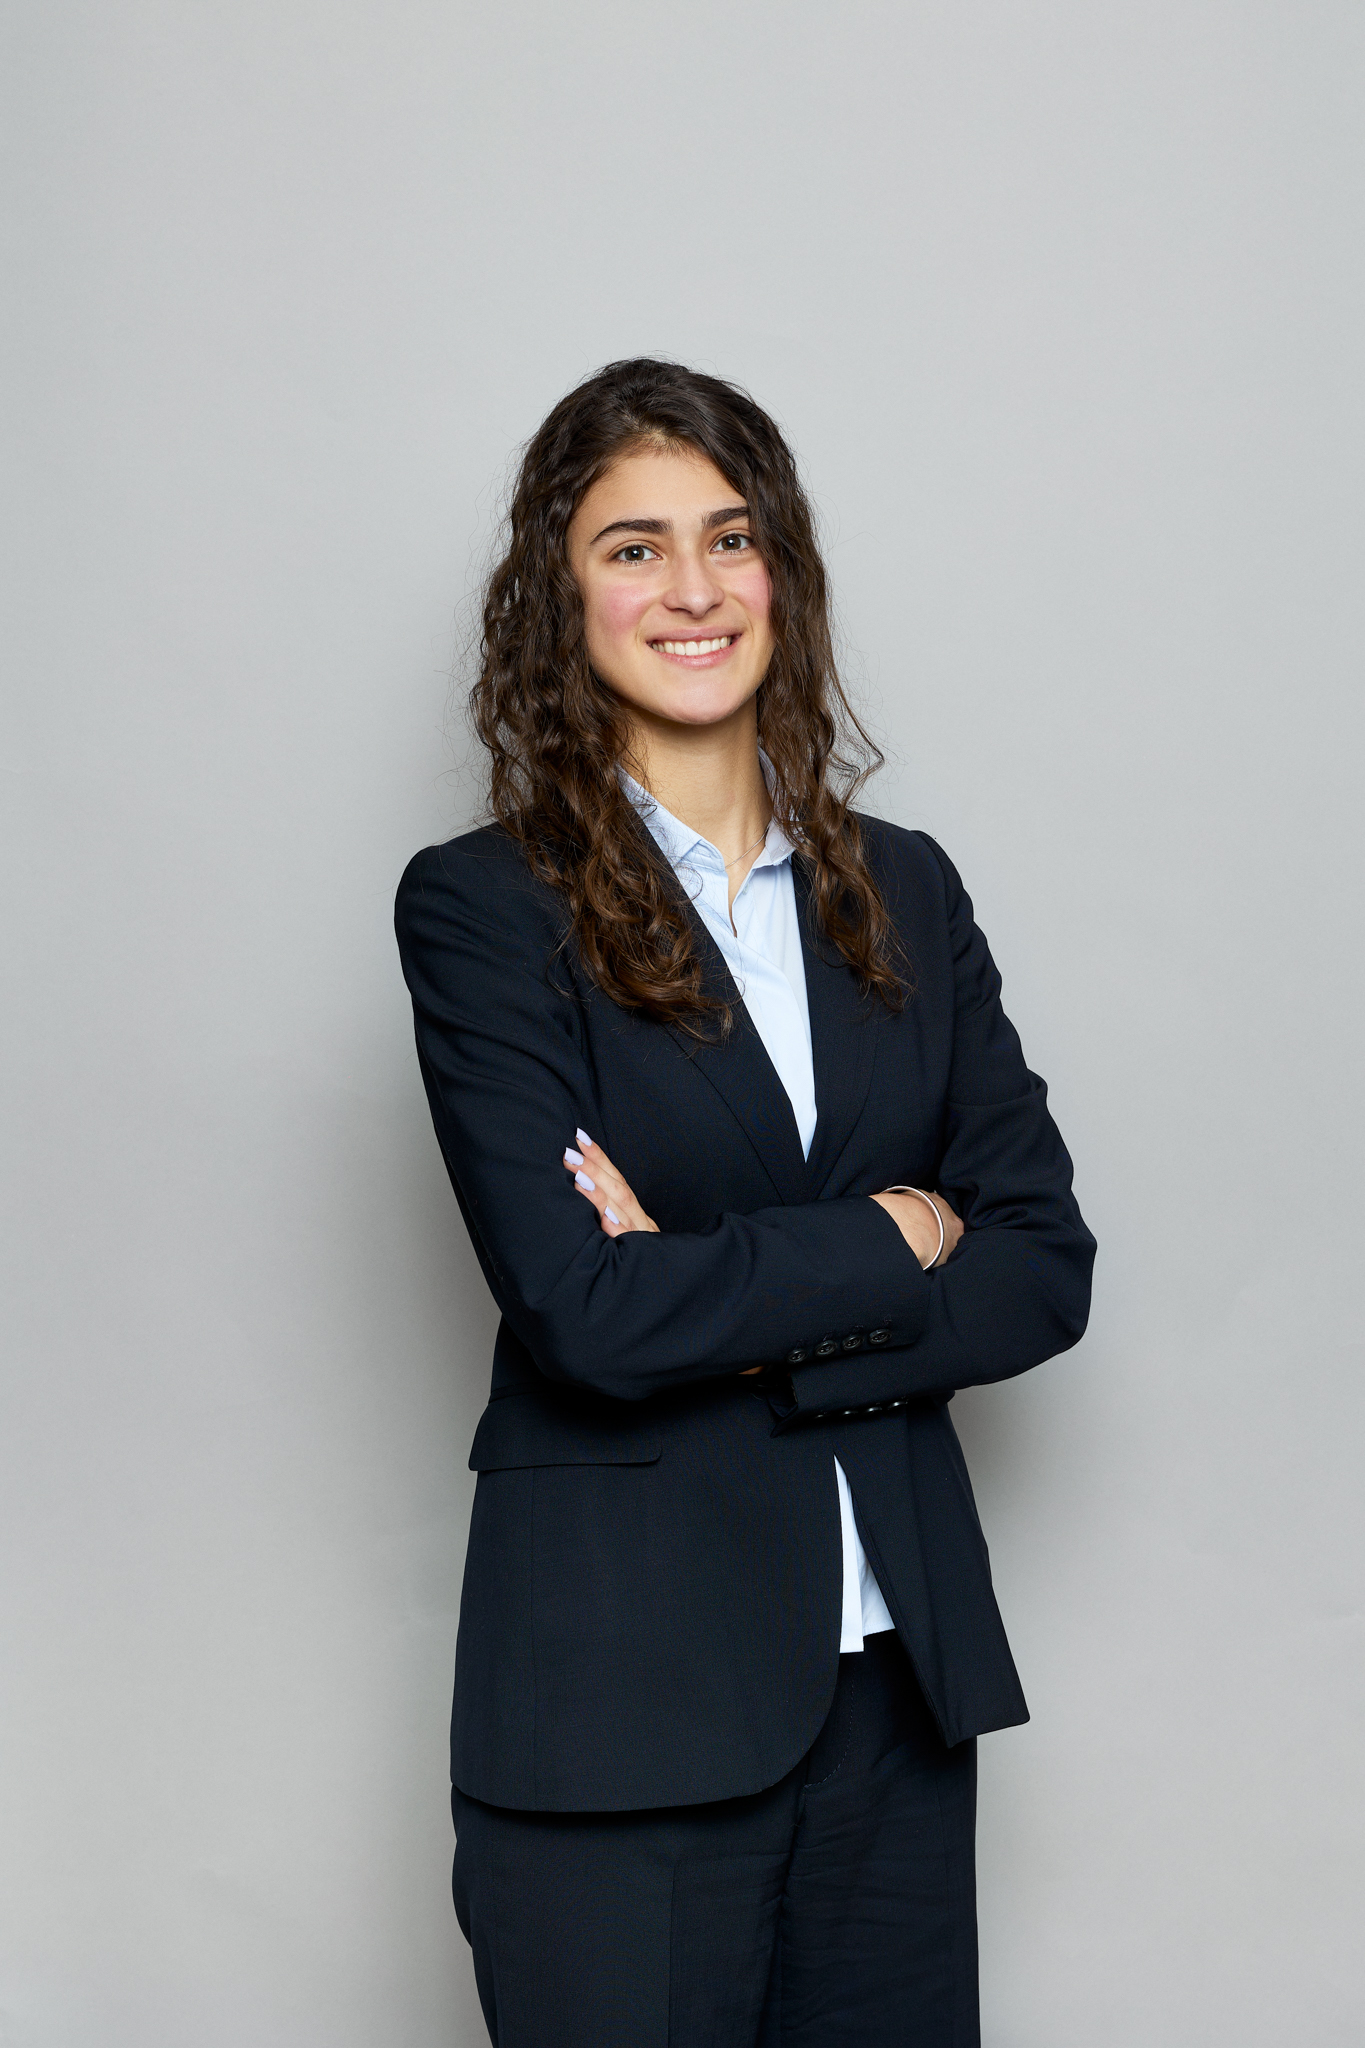 A young woman in a business suit posed for a photo during an event.